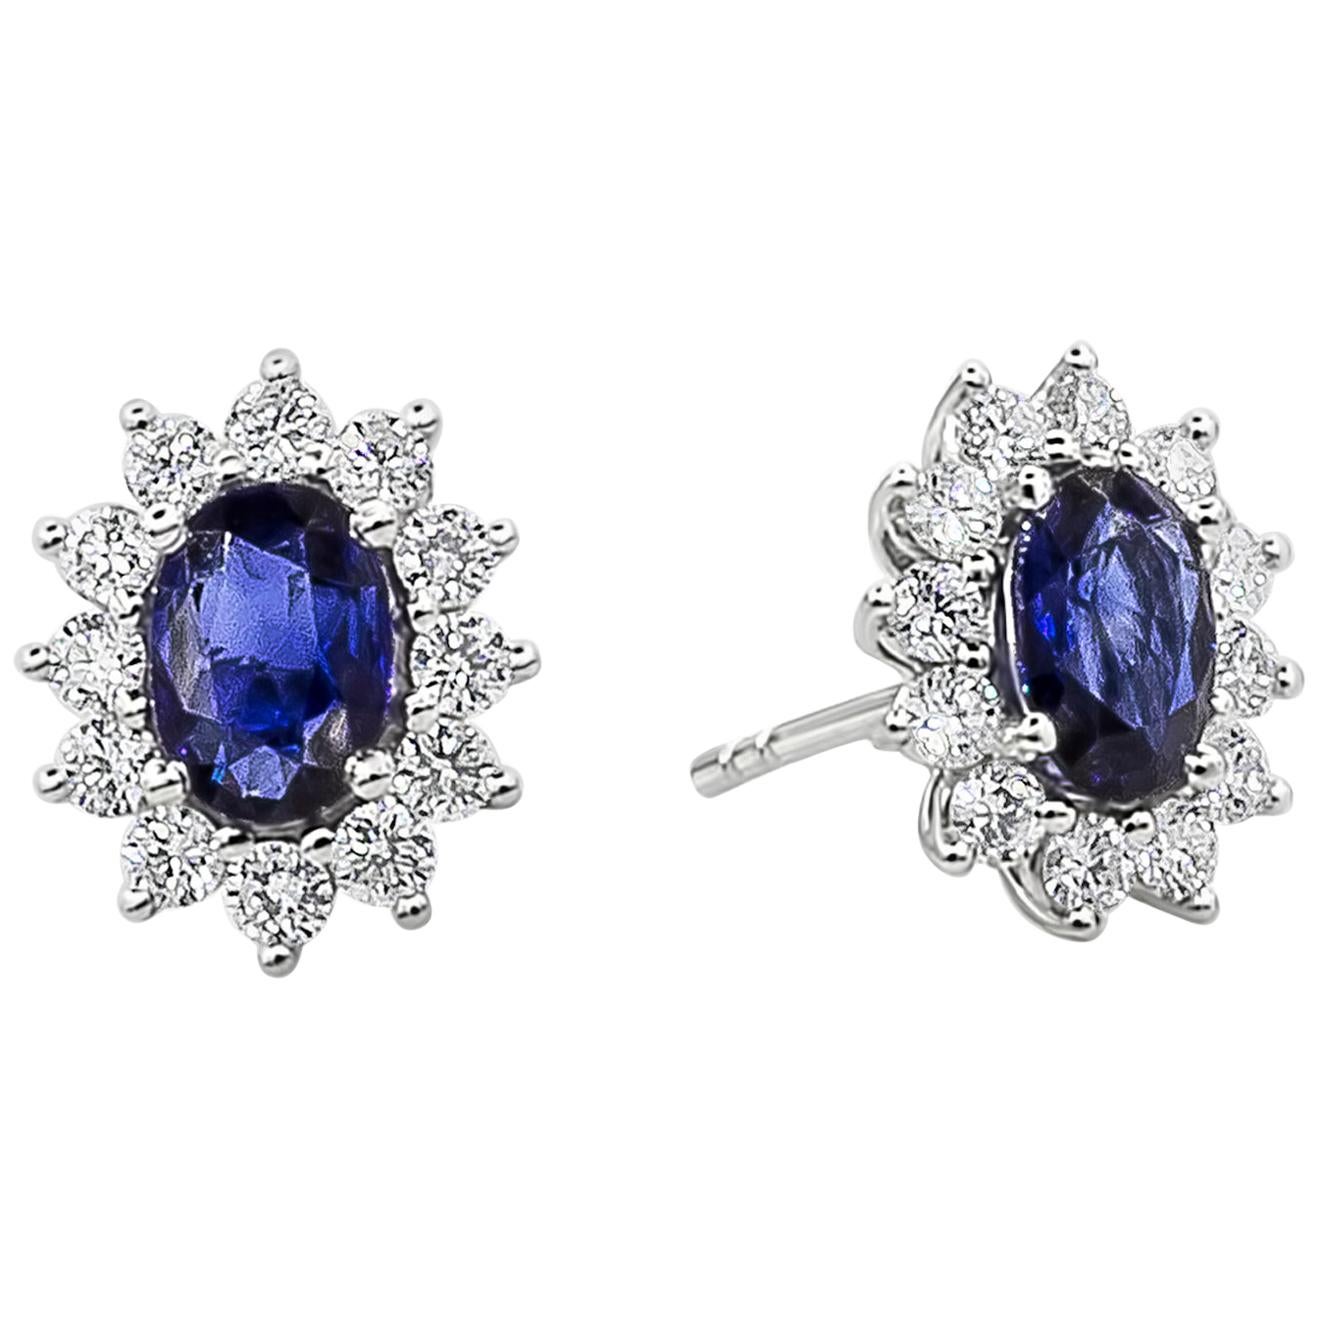 This beautiful color-rich gemstone earrings features an oval cut blue sapphires weighing 1.53 carats total. Elegantly surrounded by brilliant round diamonds set in a floral motif halo design, Diamonds weighs 0.79 carats total. Made in 18K White